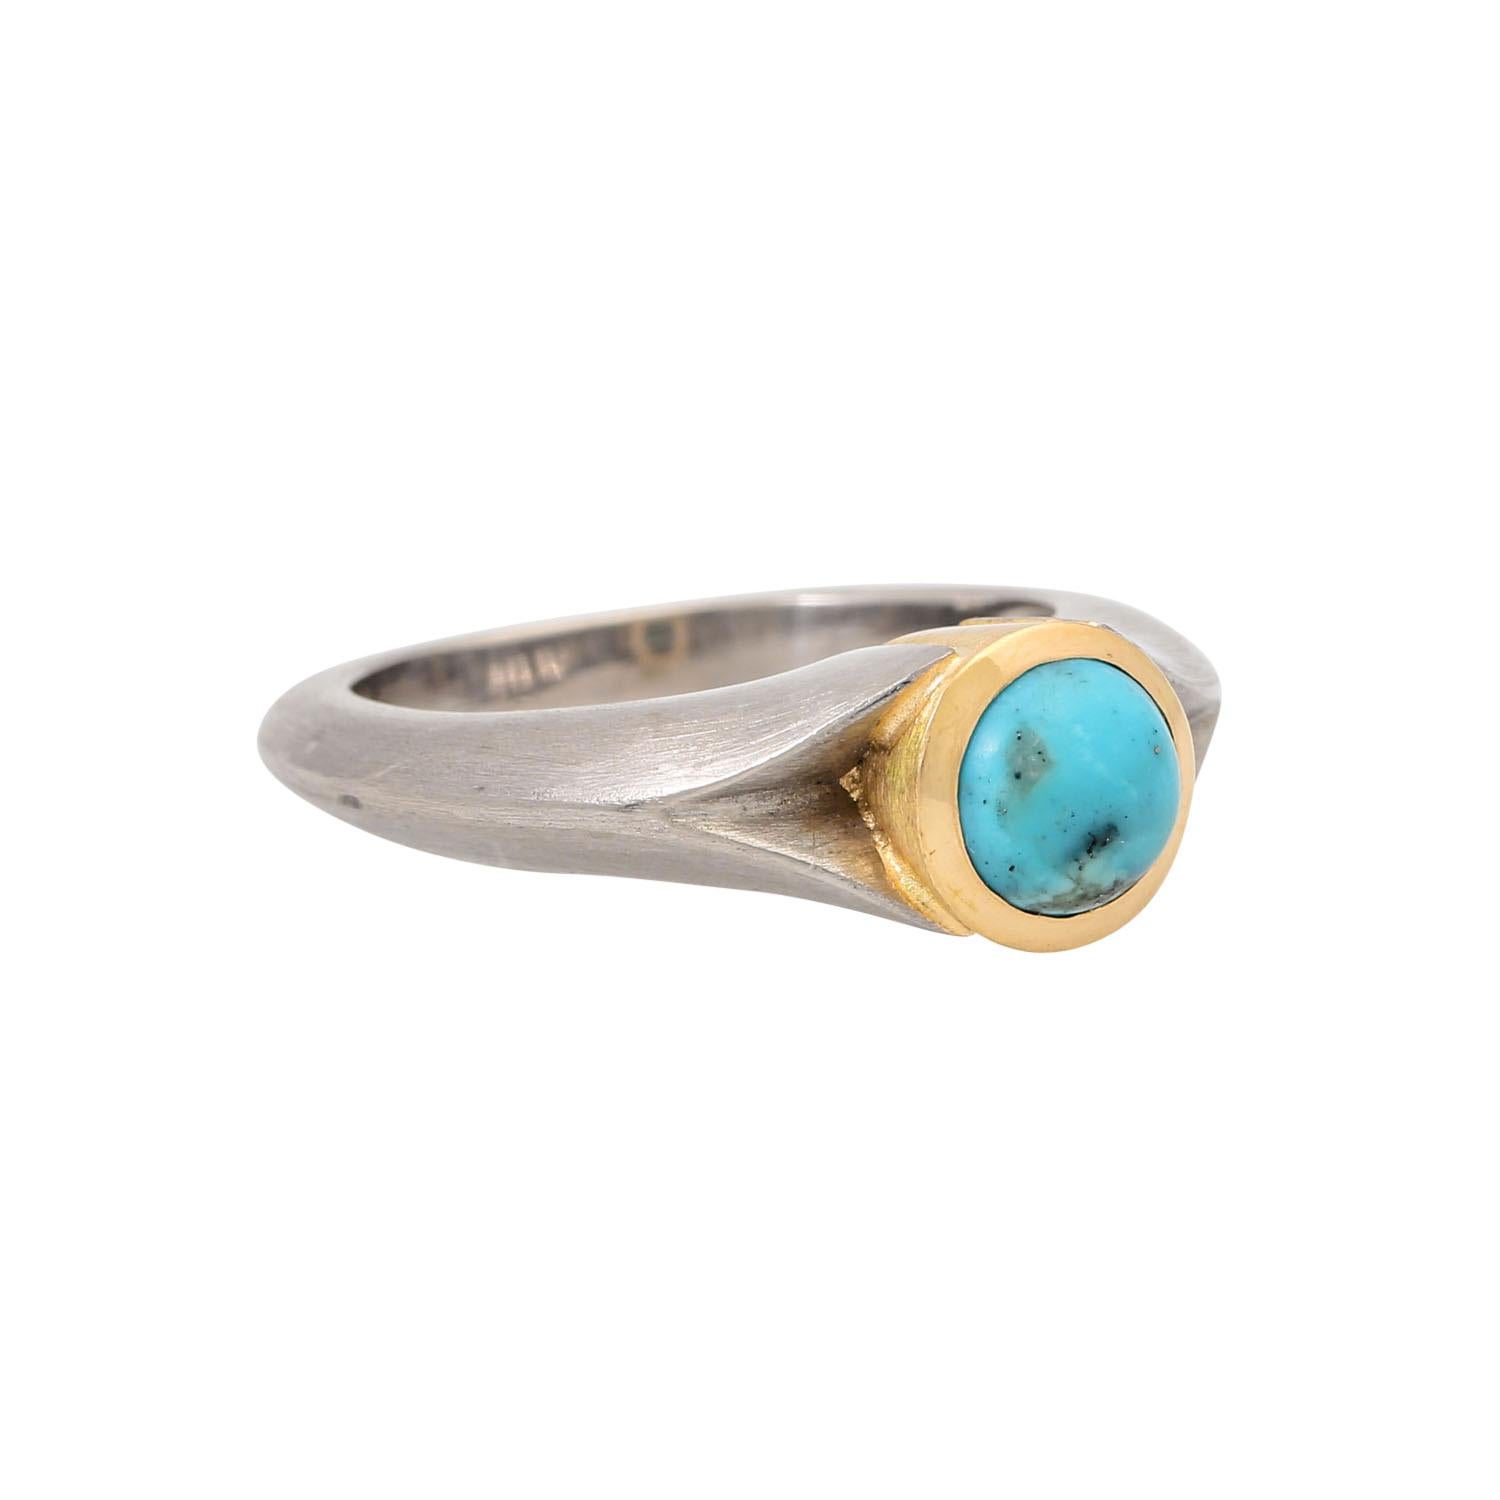 WG/GG 18K, 11.1 gr, price: €2,350, RW: 57, 21st century, slight signs of wear, with manufacturer's mark Tobias Michel, including copy of invoice (2017).

 Ring with turquoise, 18K WG/YG, 11.1 gr, PP: 2,350 €, ring size 57, 21st century, minor signs